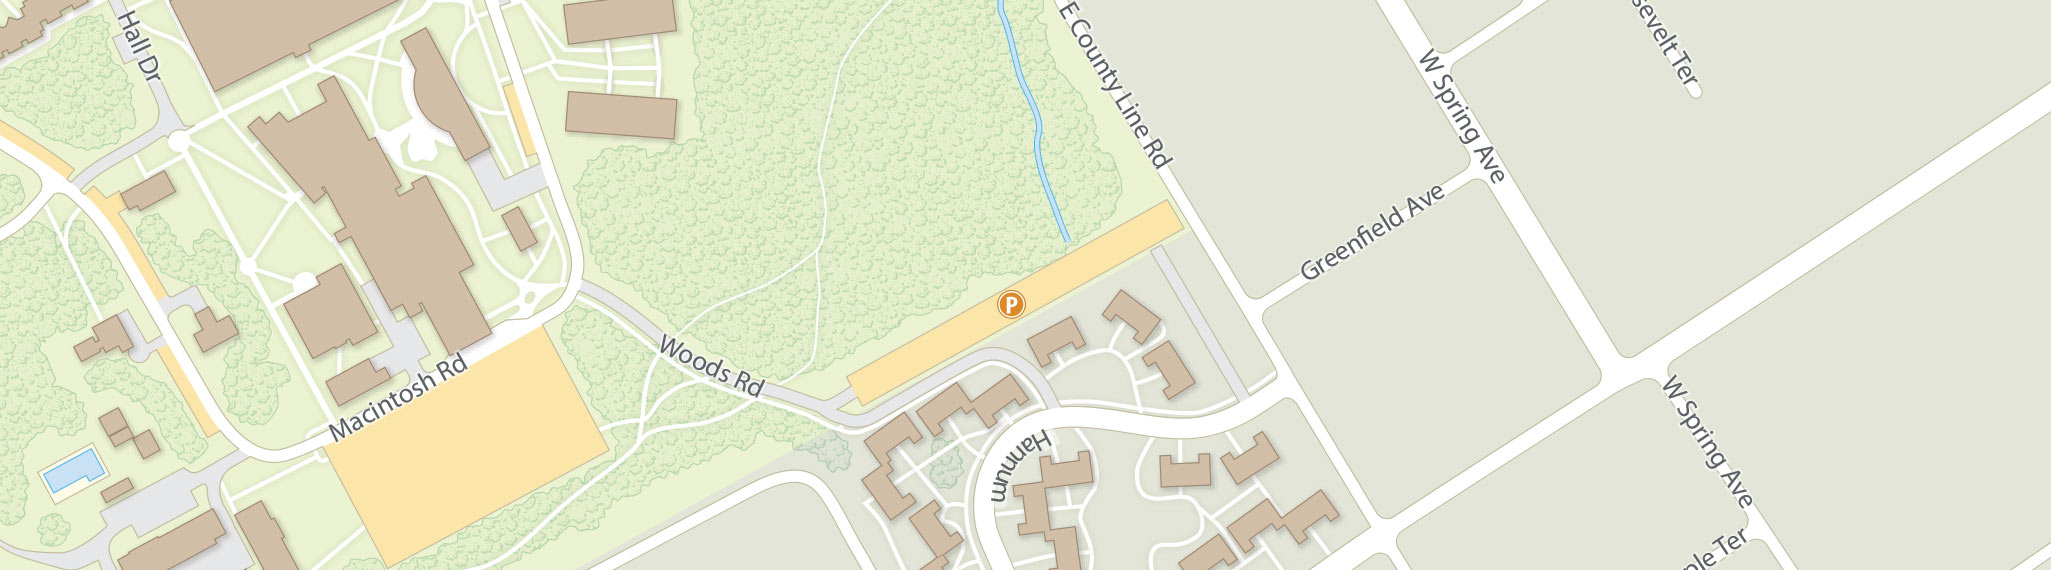 A map showing the visitor parking locations on Haverford's campus